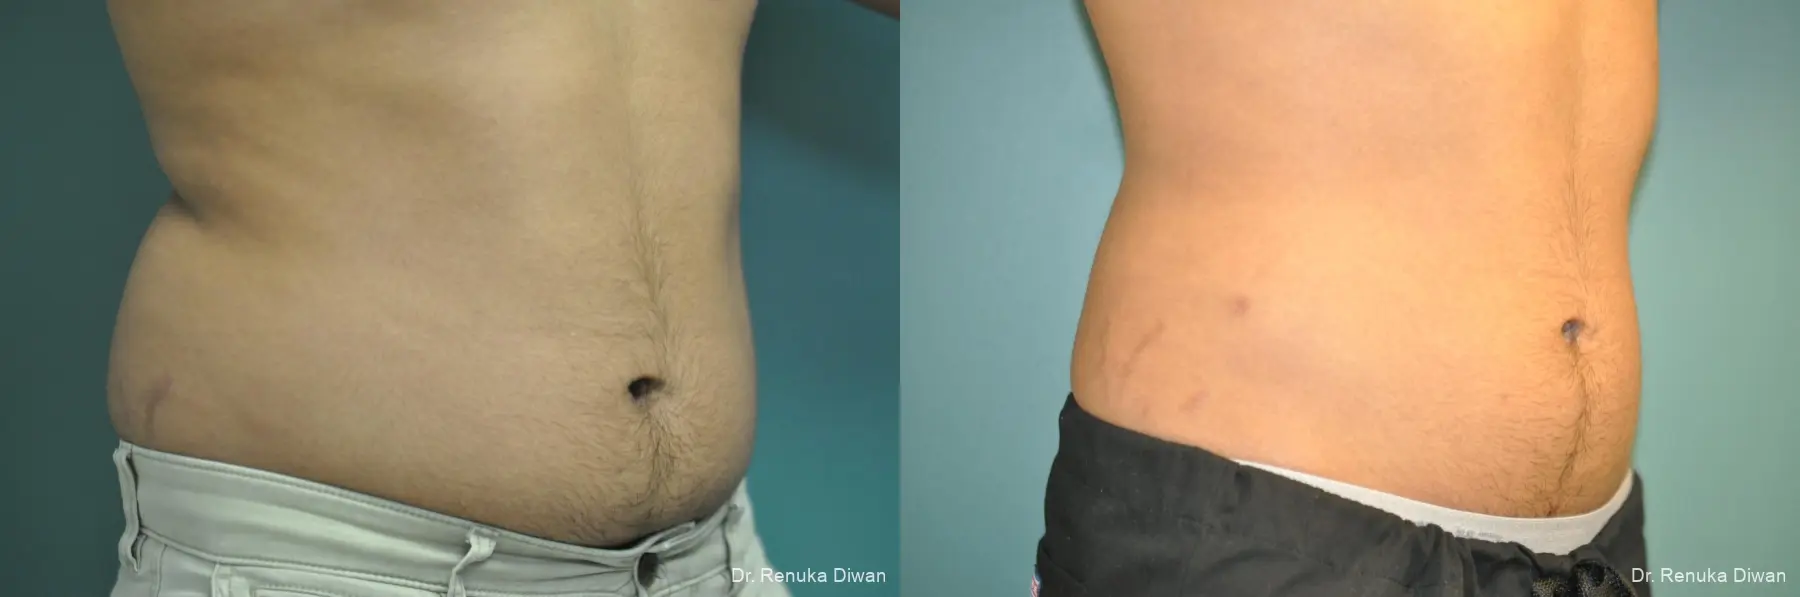 Liposuction For Men: Patient 1 - Before and After 3